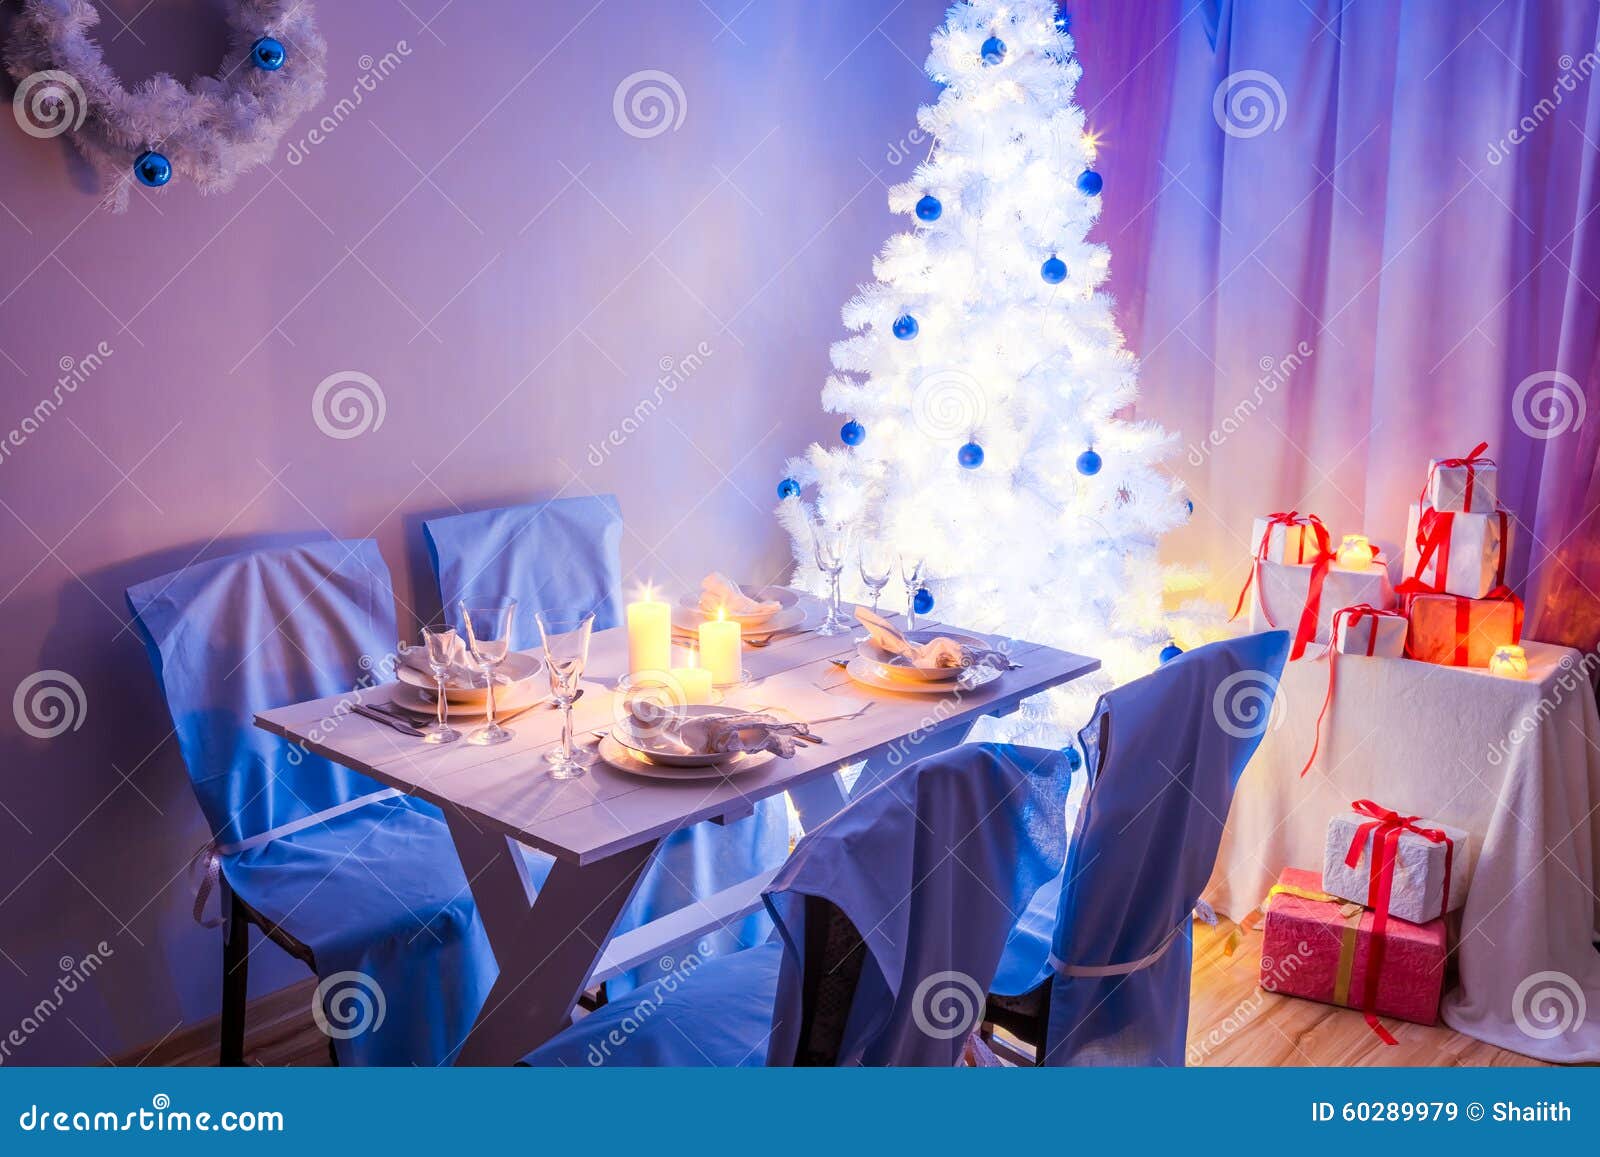 Christmas Table Setting with Present and Tree Stock Image - Image of ...